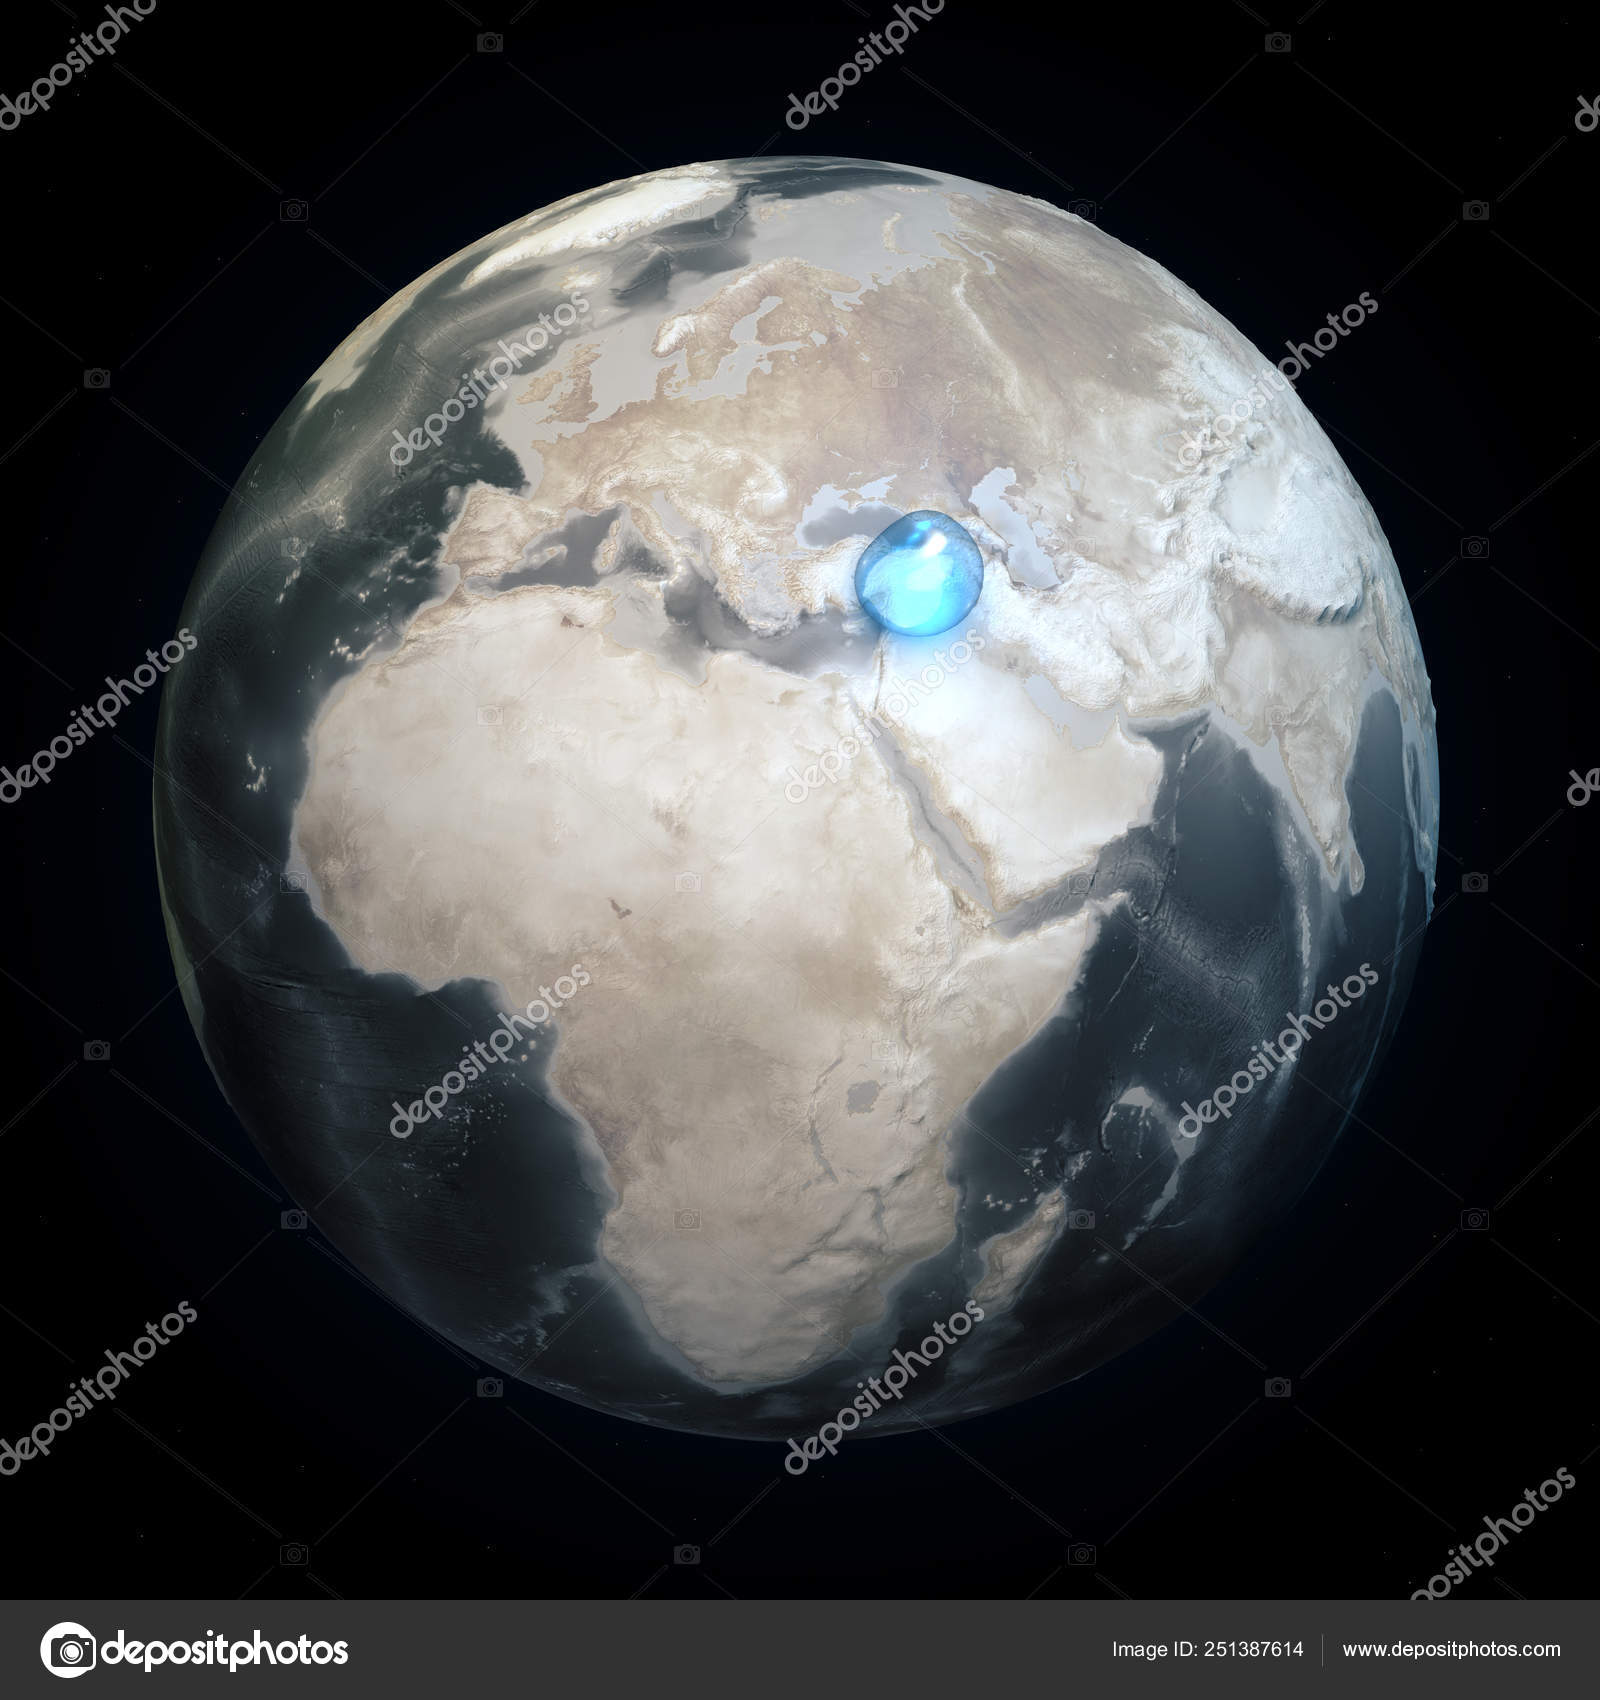 All　©vampy1　Water　Map　Sphere　by　Stock　Place　Photo　World　Water　Water　Earth　One　251387614